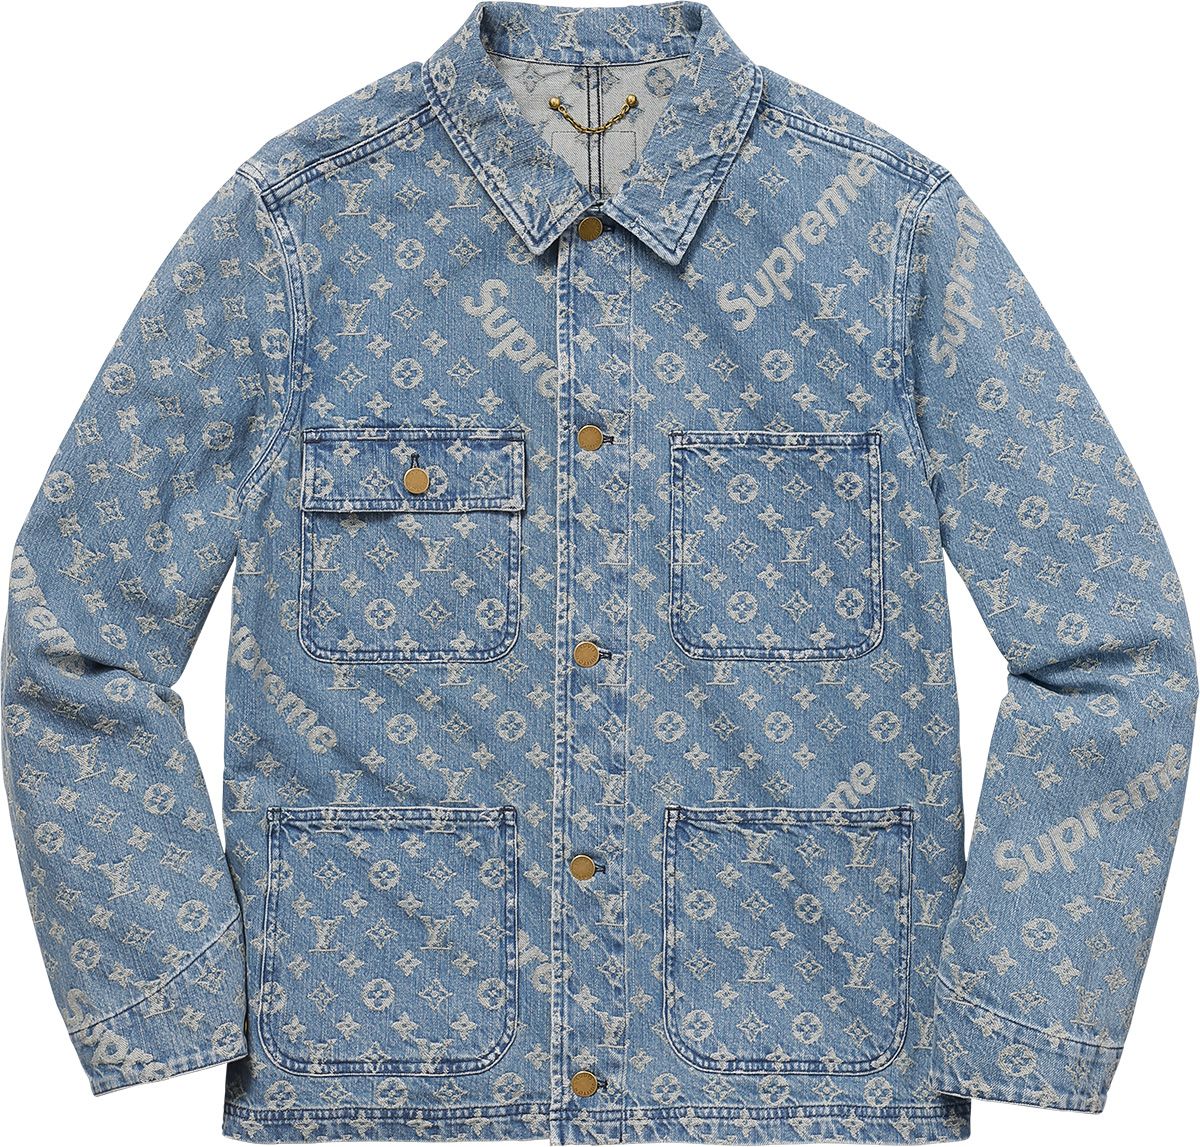 Louis Vuitton x Supreme clothing for men  Buy or Sell LV clothes -  Vestiaire Collective